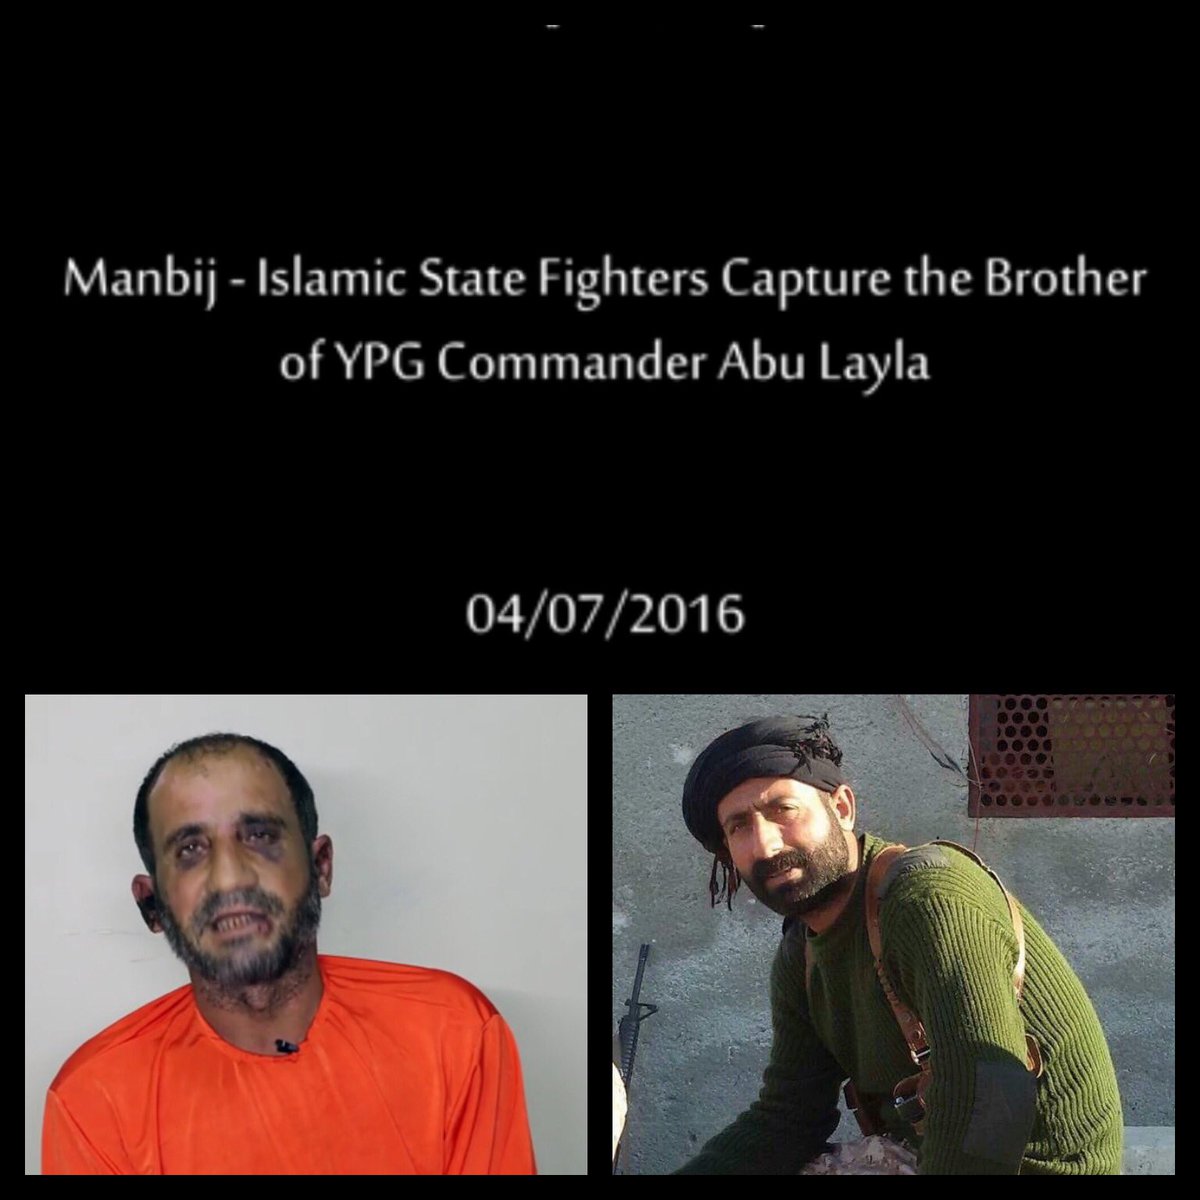 ISIS claims to have captured the brother of a famous YPG/SDF commander Abu Layla, who was killed on June 5th.  